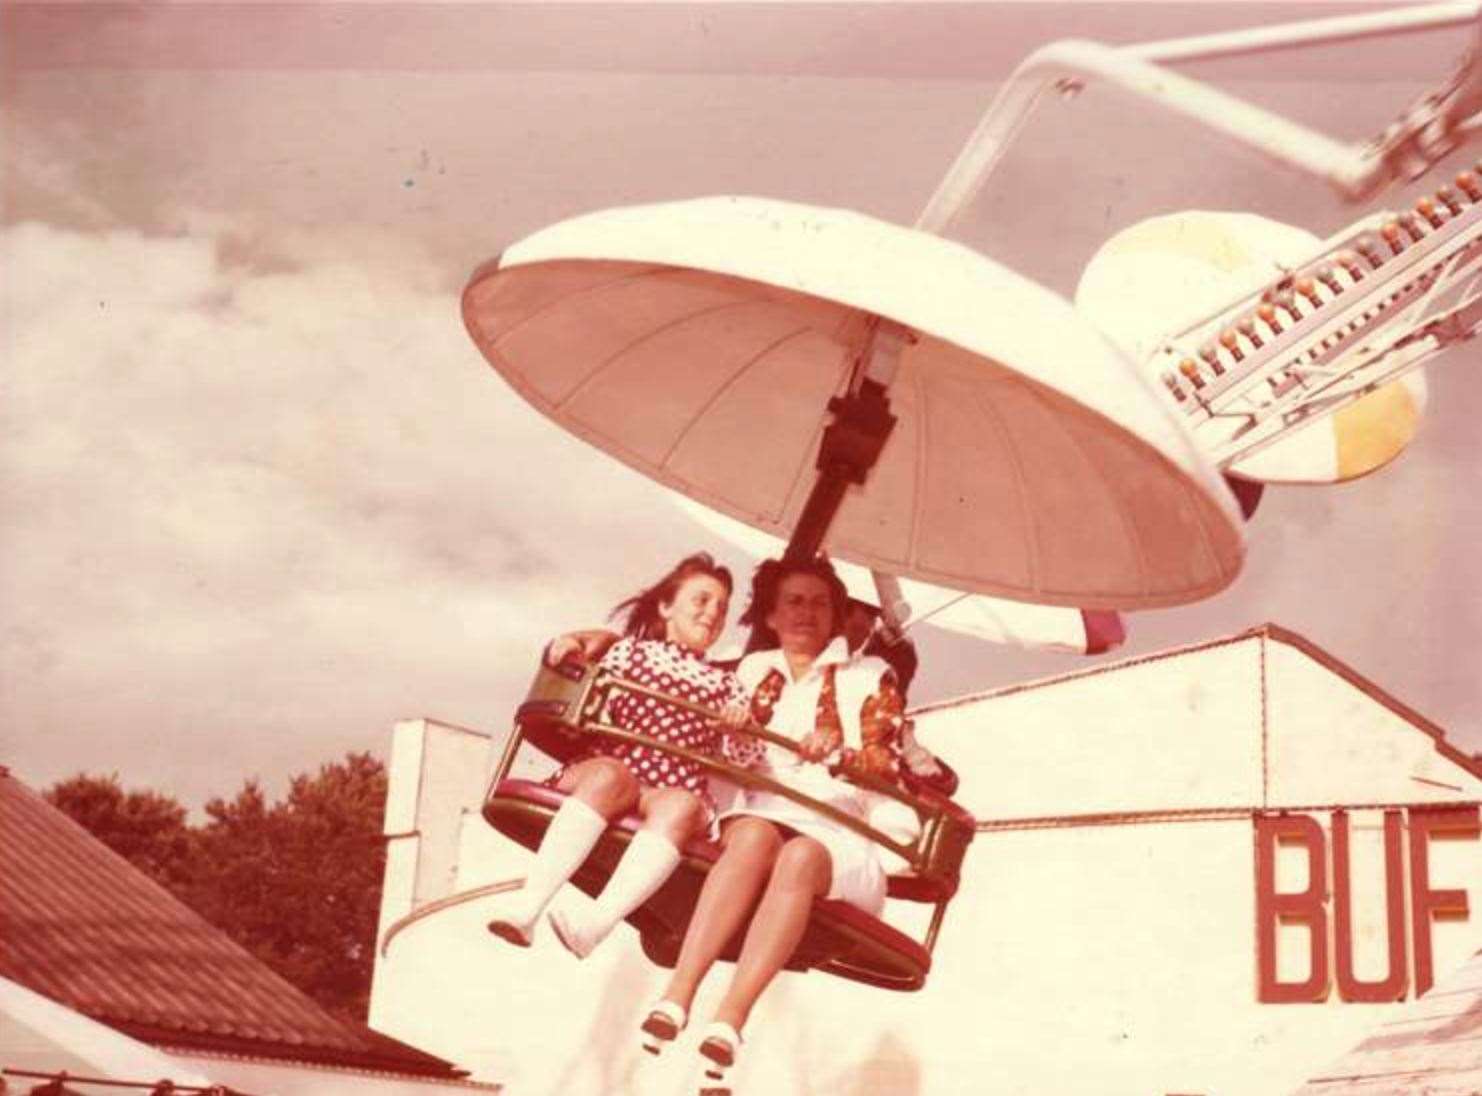 The paratrooper ride, from the 1970s. Picture: John Hutchinson Collection courtesy of the Dreamland Trust